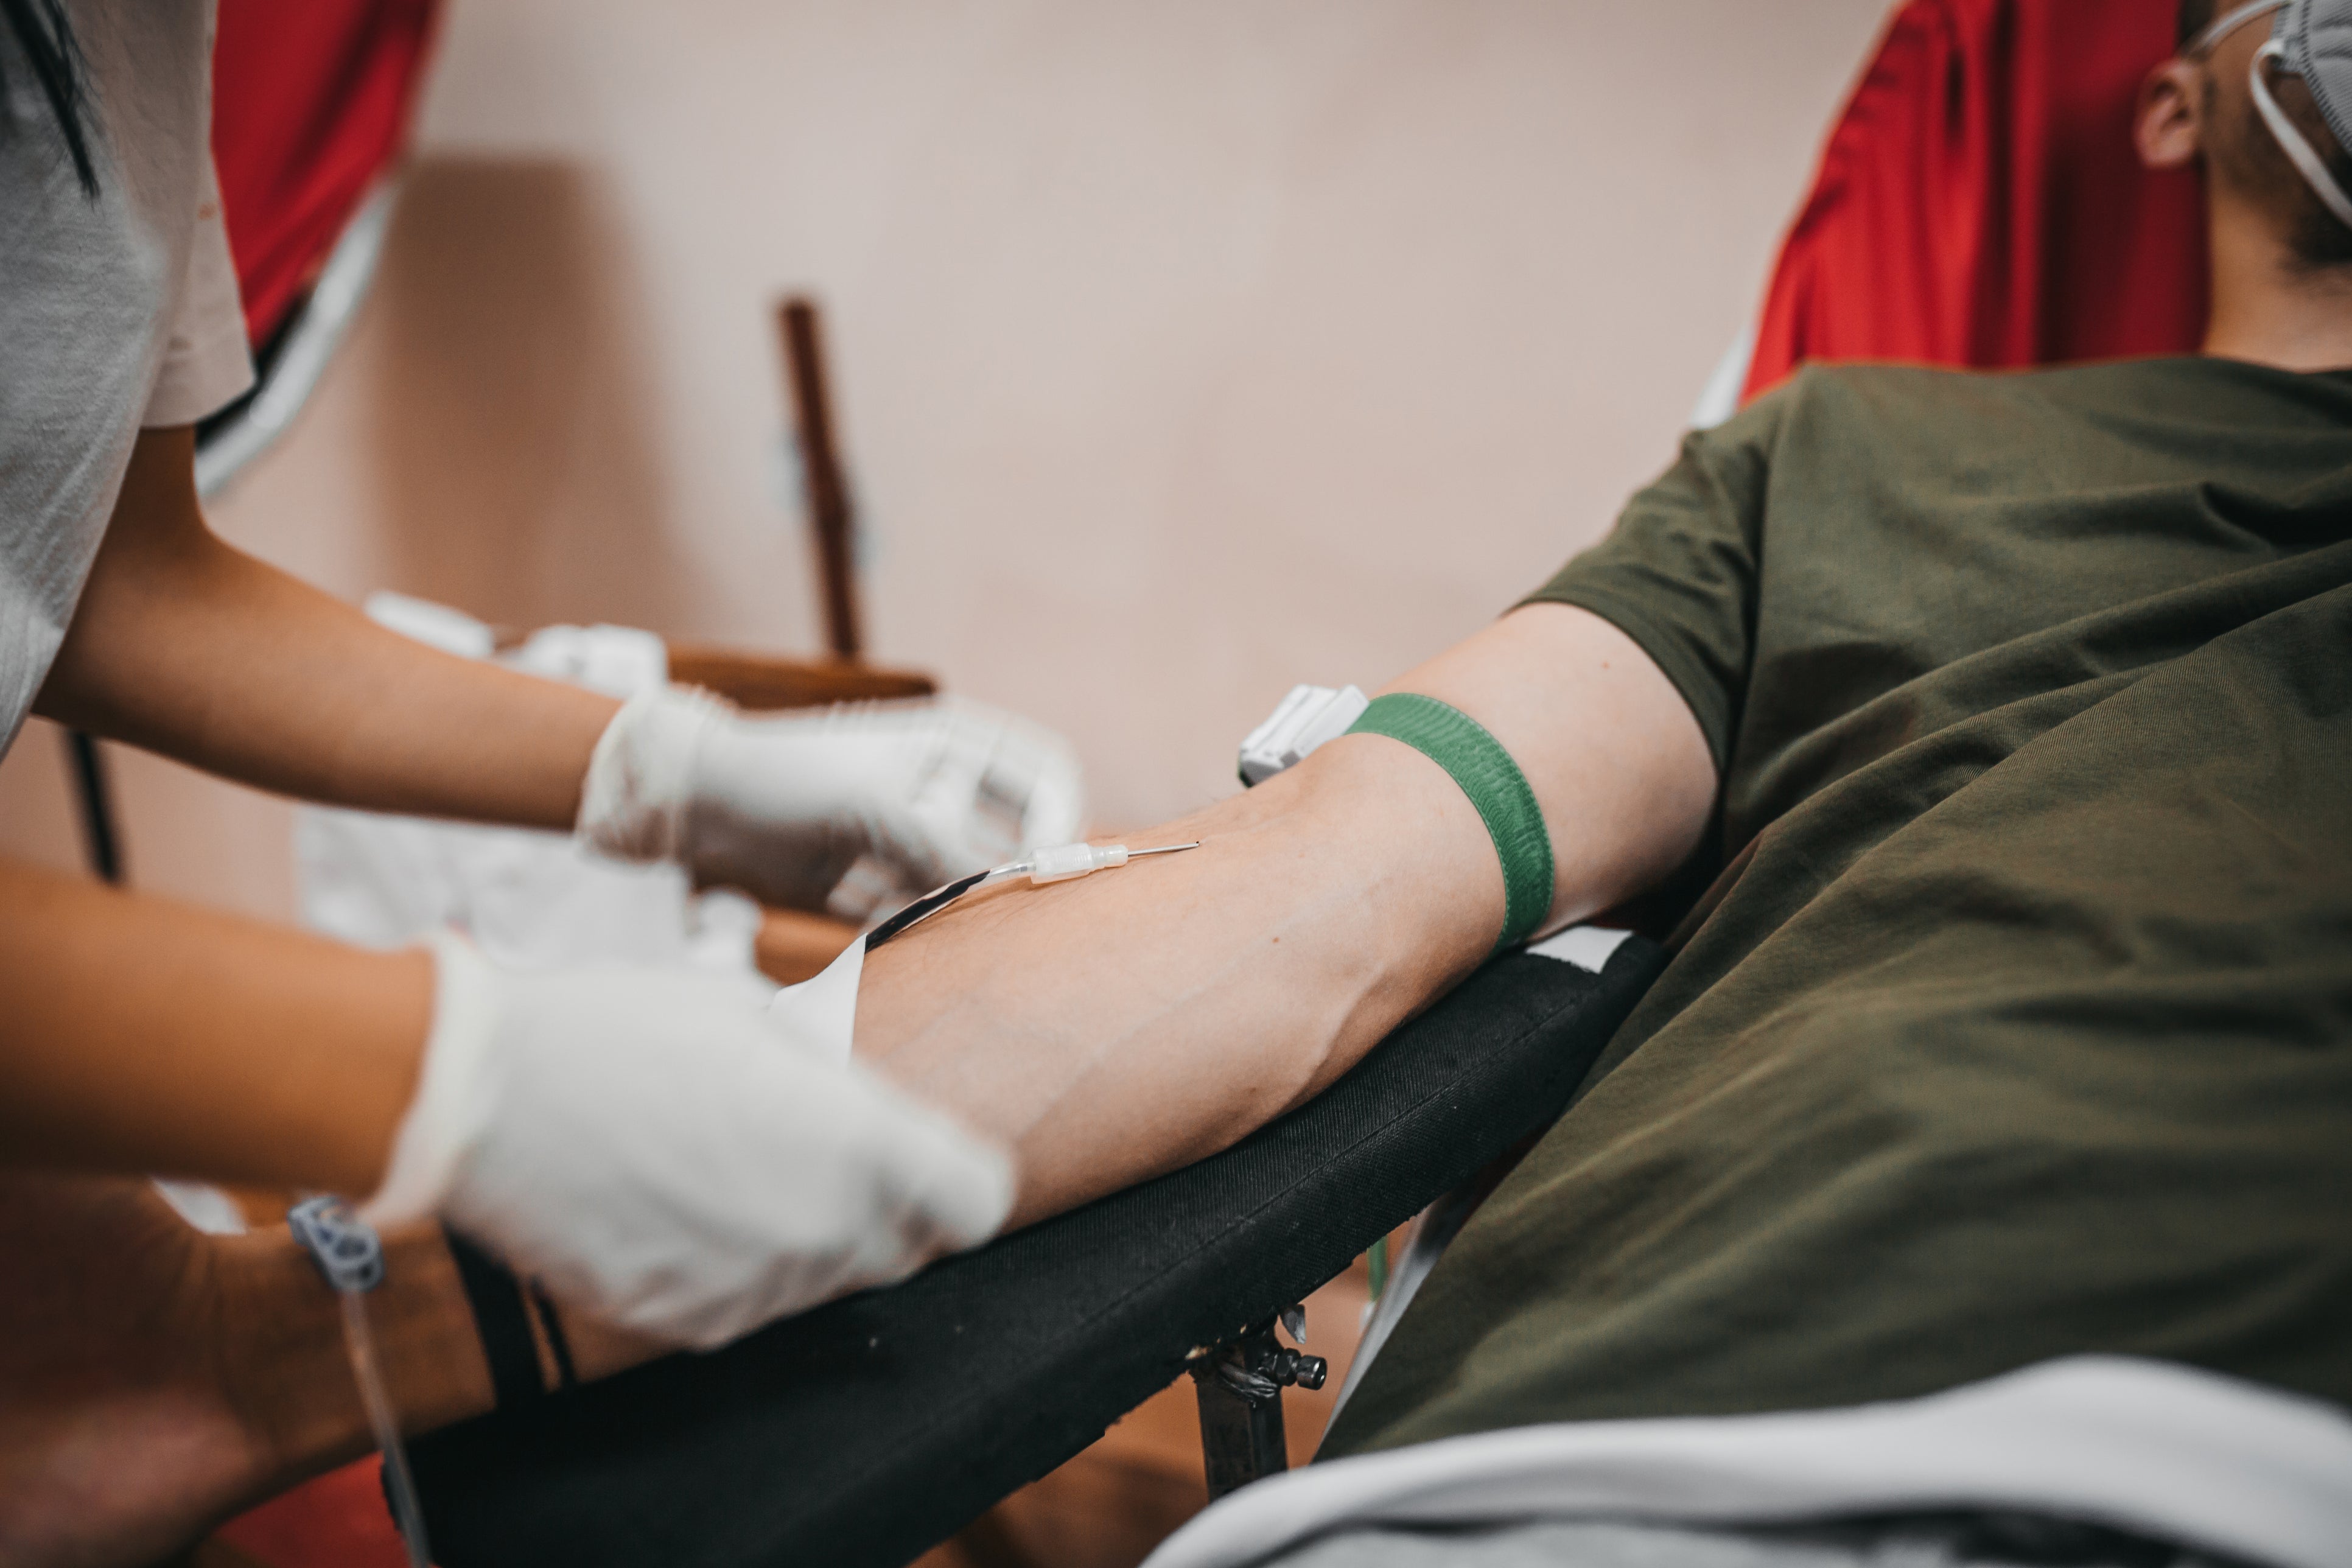 Around 400 new blood donors are needed each day in the UK